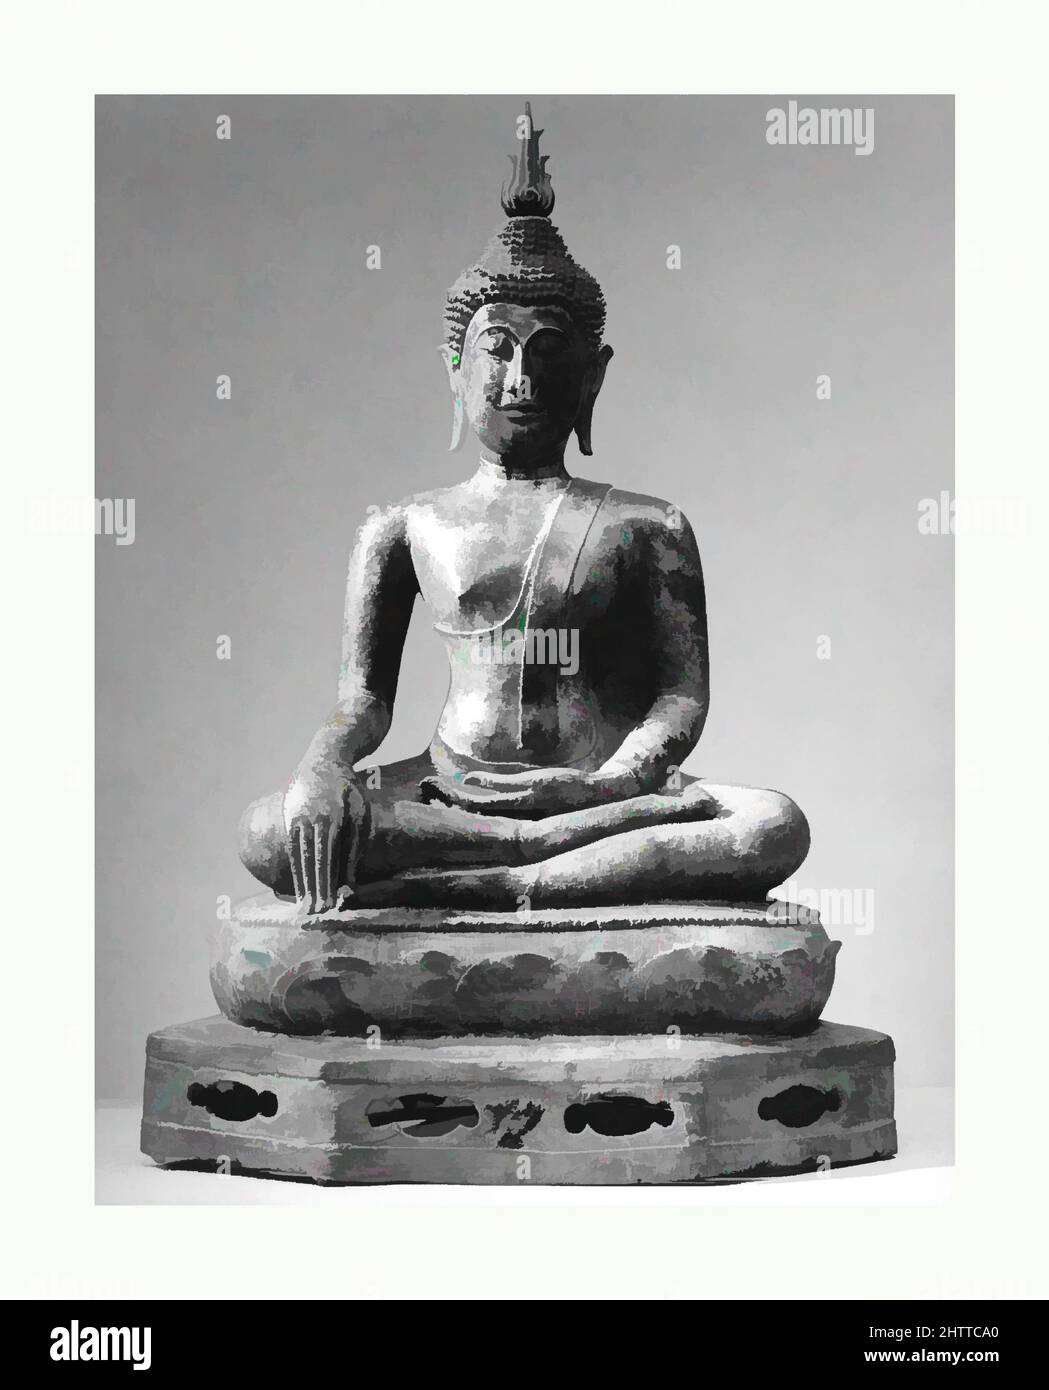 Art inspired by Seated Buddha, 16th century, Thailand, Bronze, H. 29 5/8 in. (75.2 cm); Gr. W. 19 3/4 in. (50.2 cm); Gr. Diam. 12 1/2 in. (31.8 cm), Sculpture, Classic works modernized by Artotop with a splash of modernity. Shapes, color and value, eye-catching visual impact on art. Emotions through freedom of artworks in a contemporary way. A timeless message pursuing a wildly creative new direction. Artists turning to the digital medium and creating the Artotop NFT Stock Photo